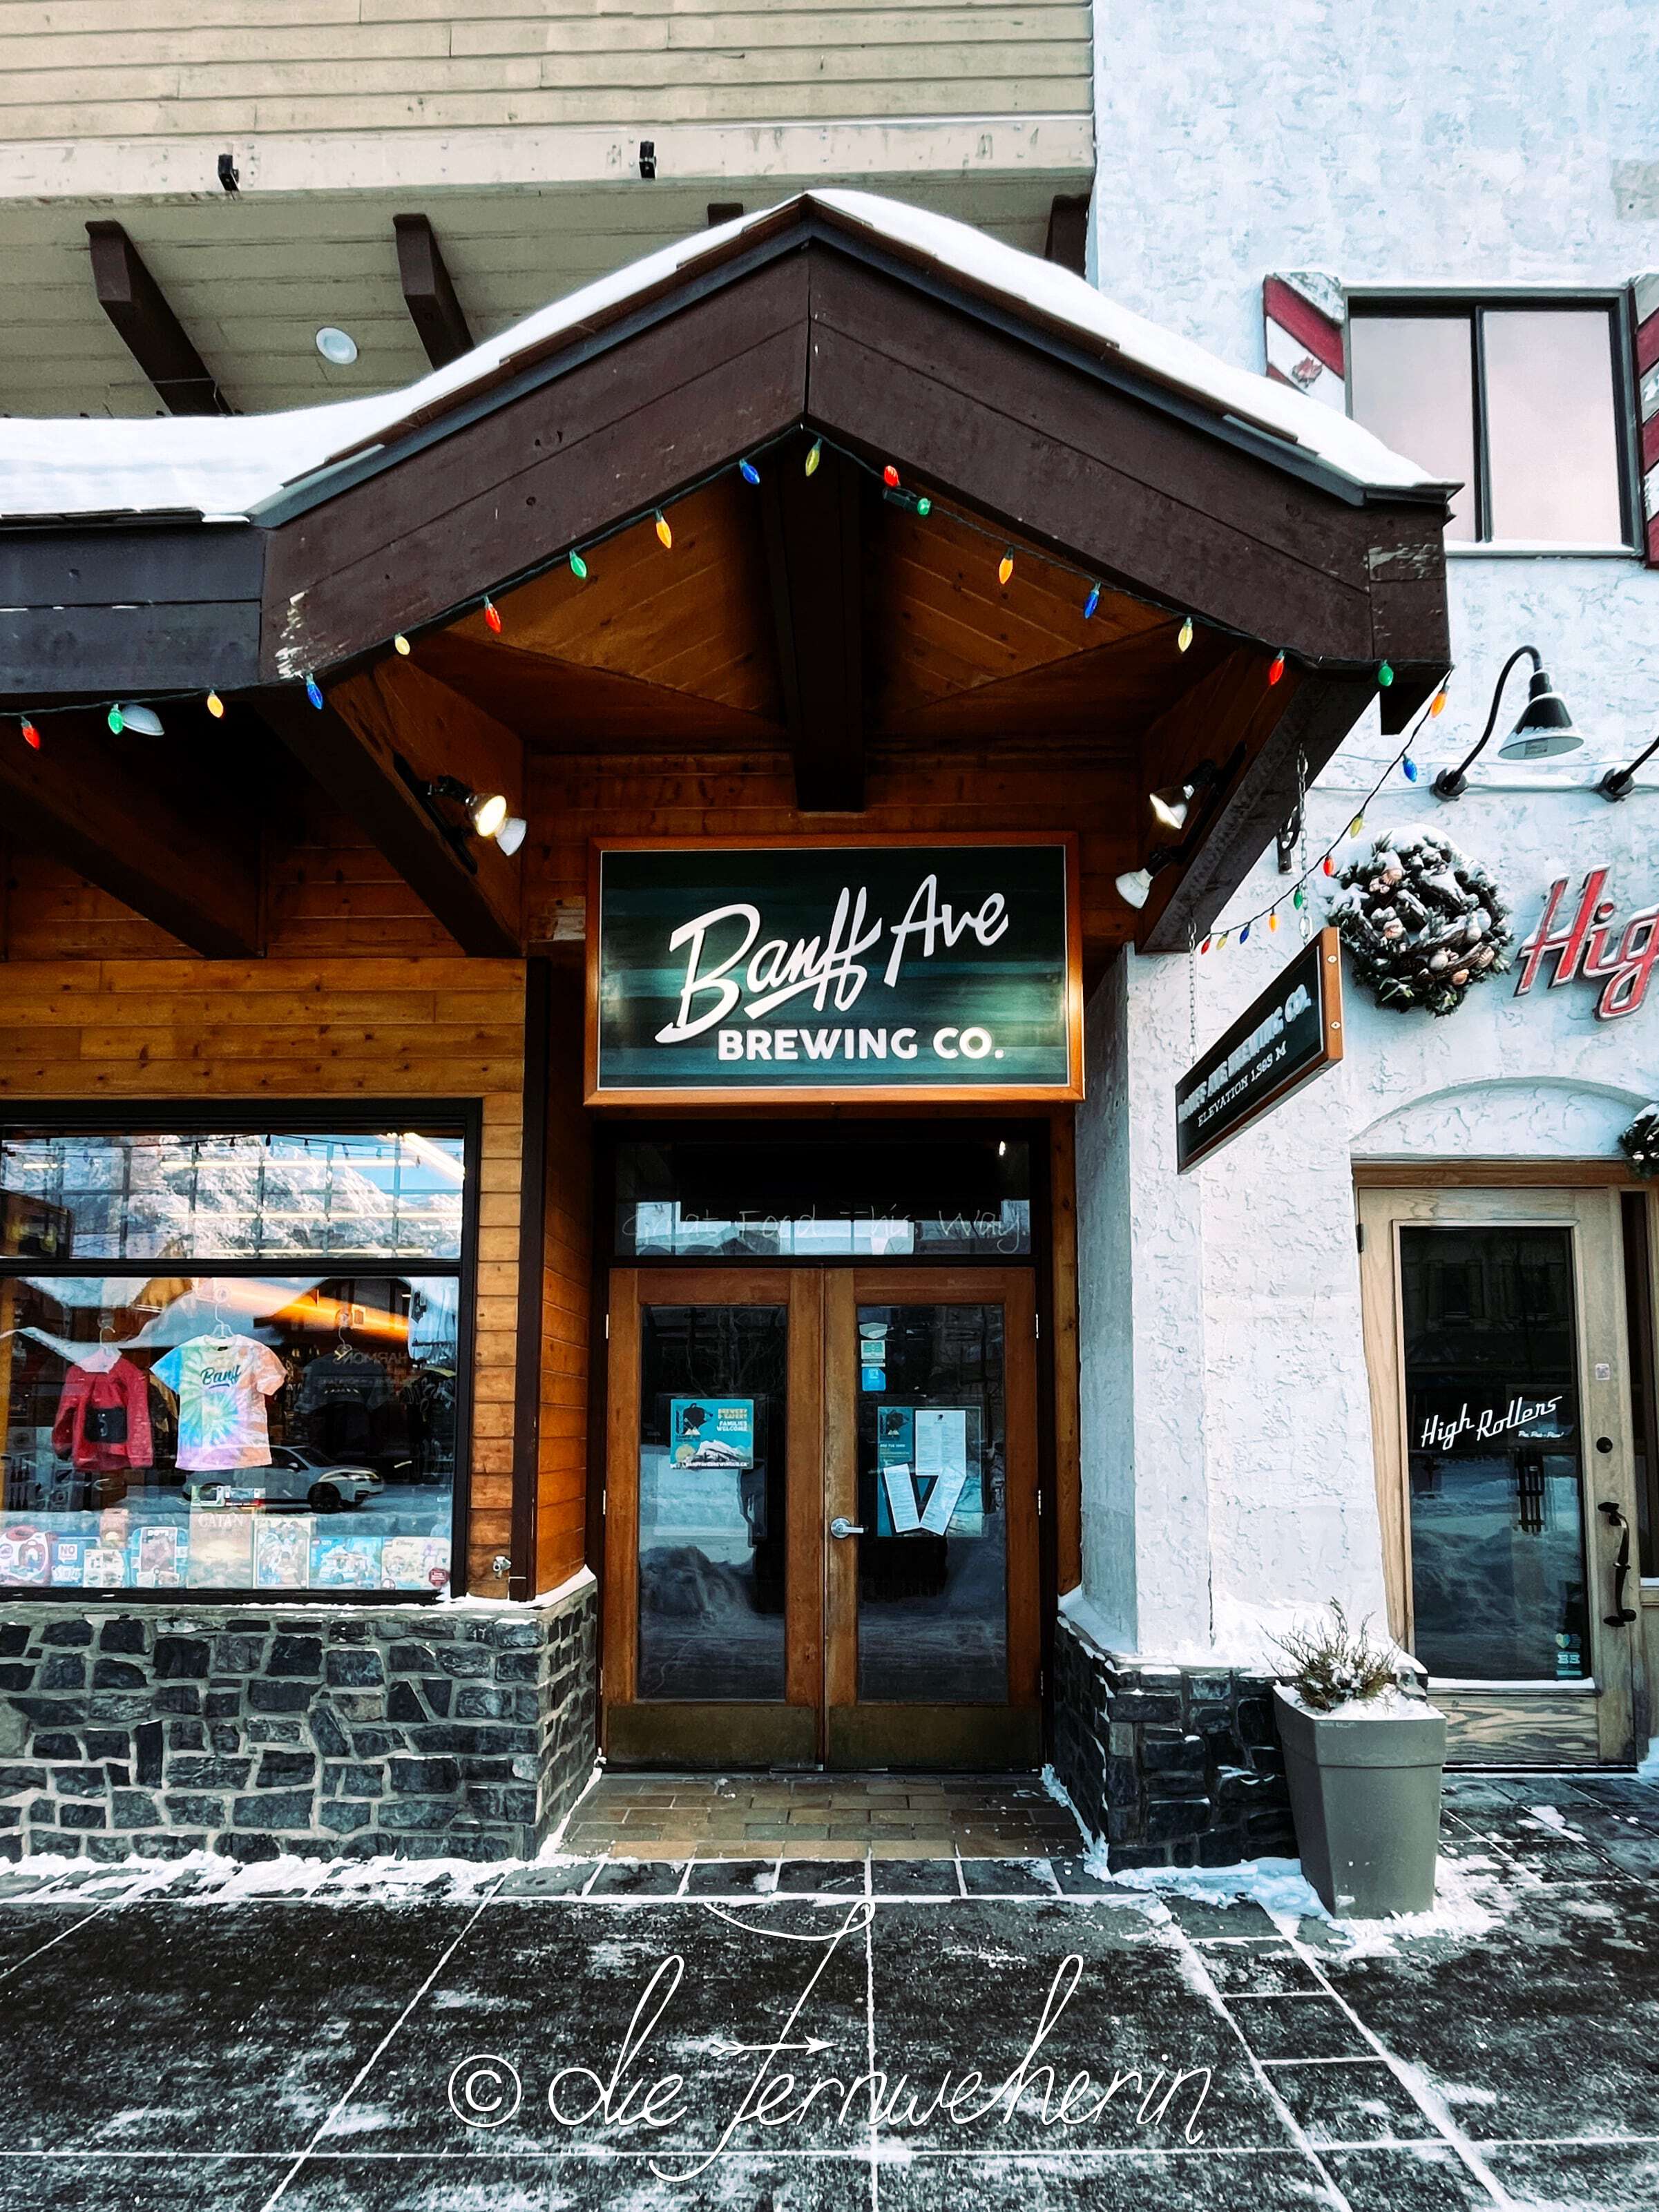 Exterior view of Banff Ave Brewing Co, a restaurant in the town of Banff.